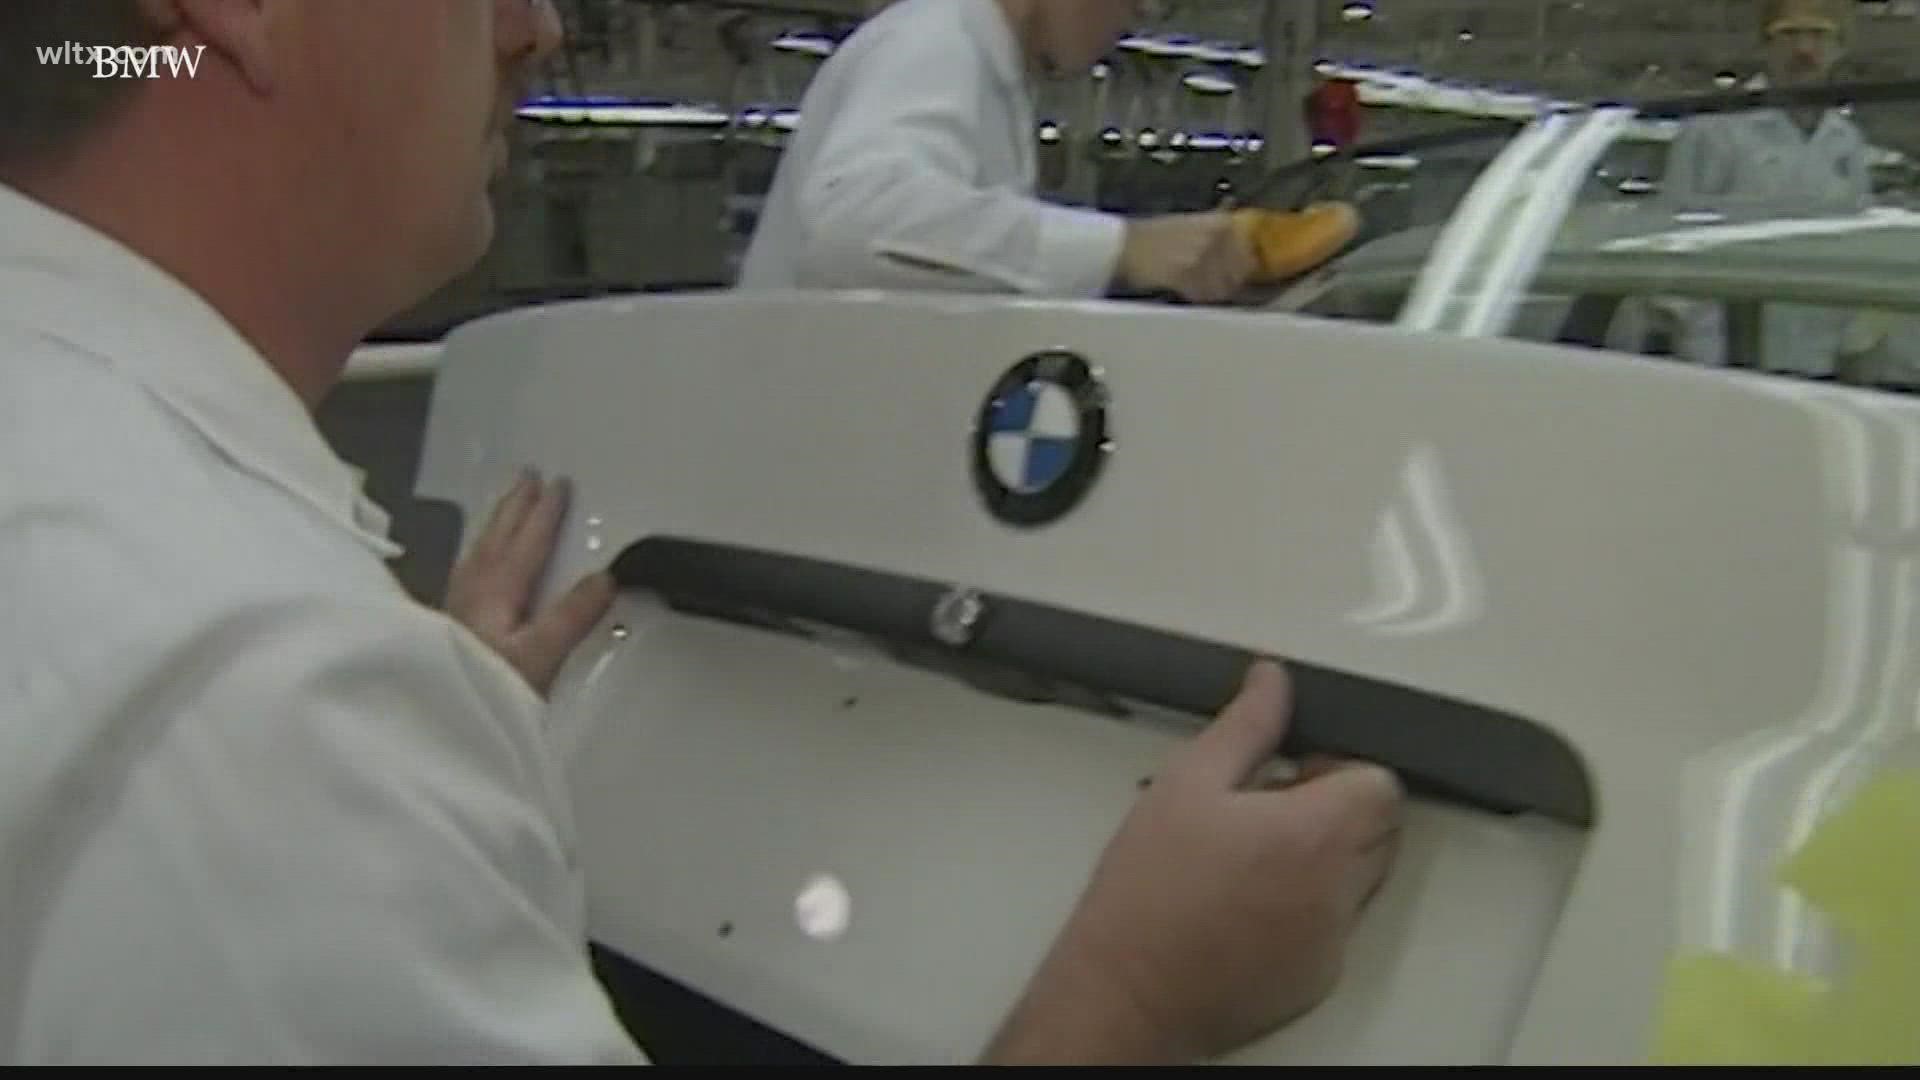 Spartanburg will be the home for BMW X models and a new high-voltage battery assembly facility will be built in Woodruff